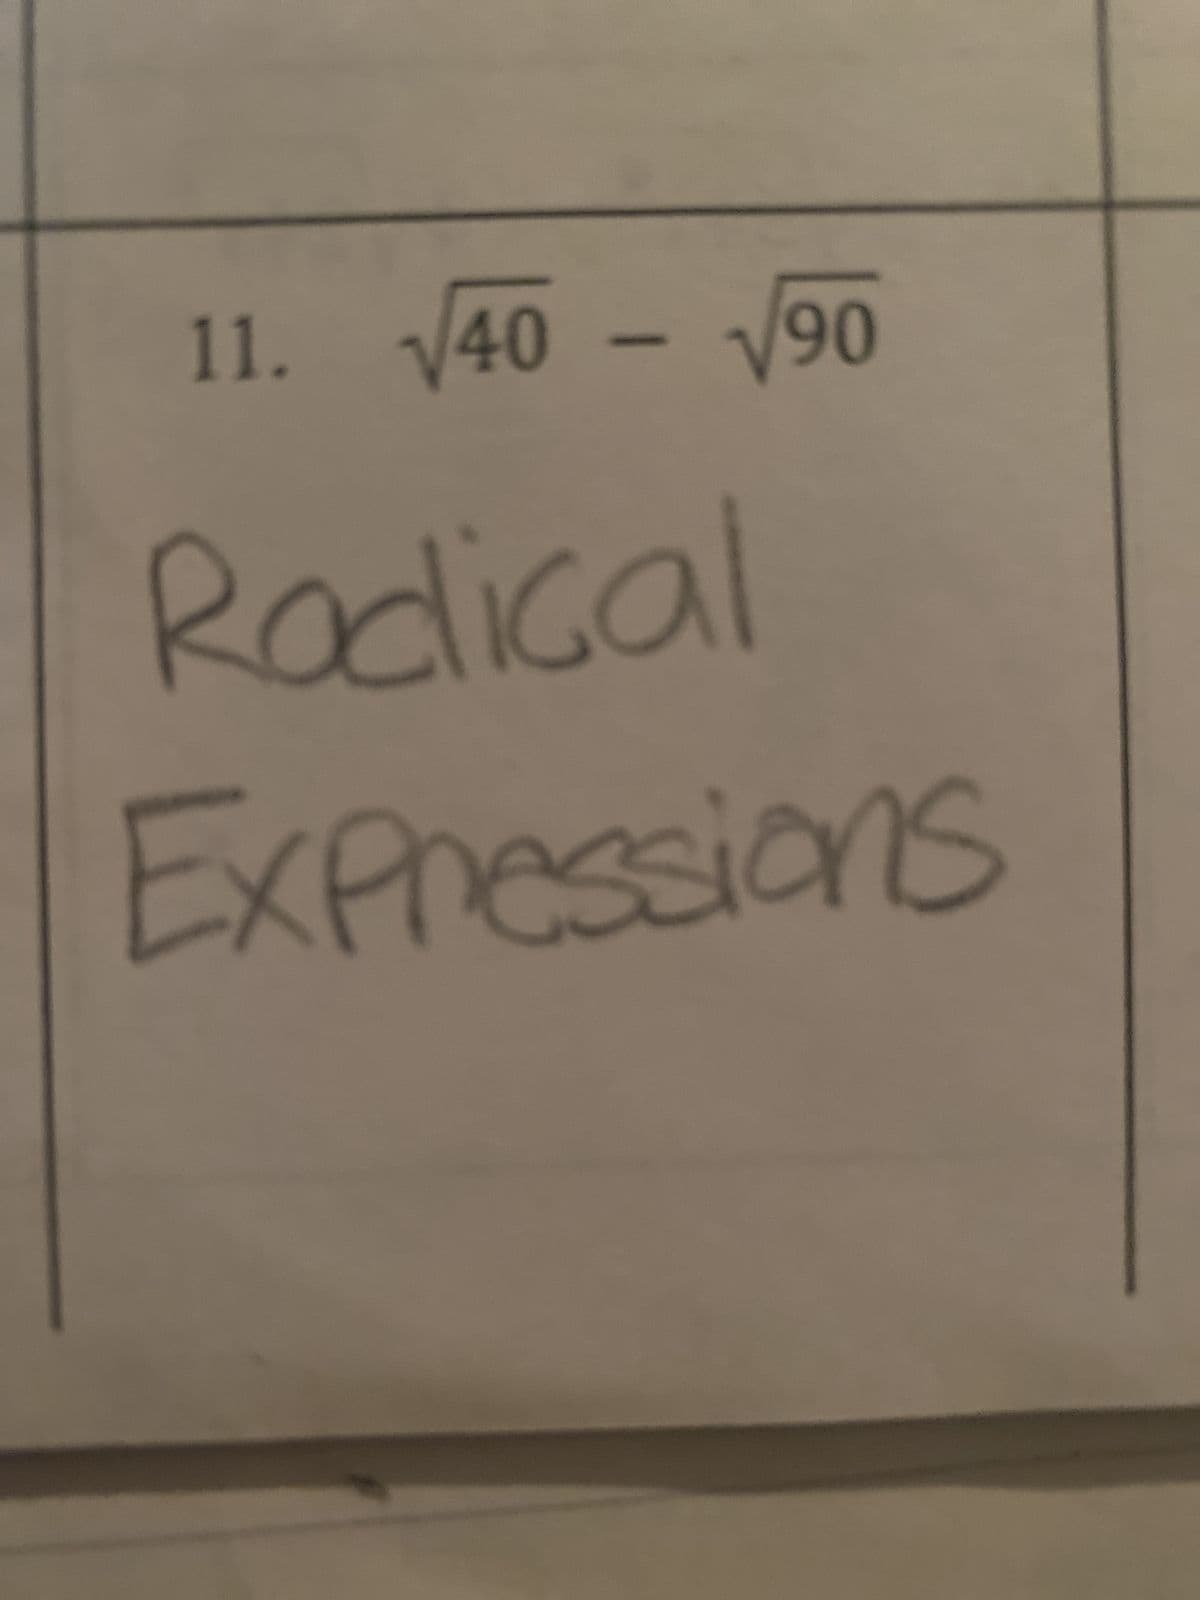 11. √40 - √90
Rodical
Expressions